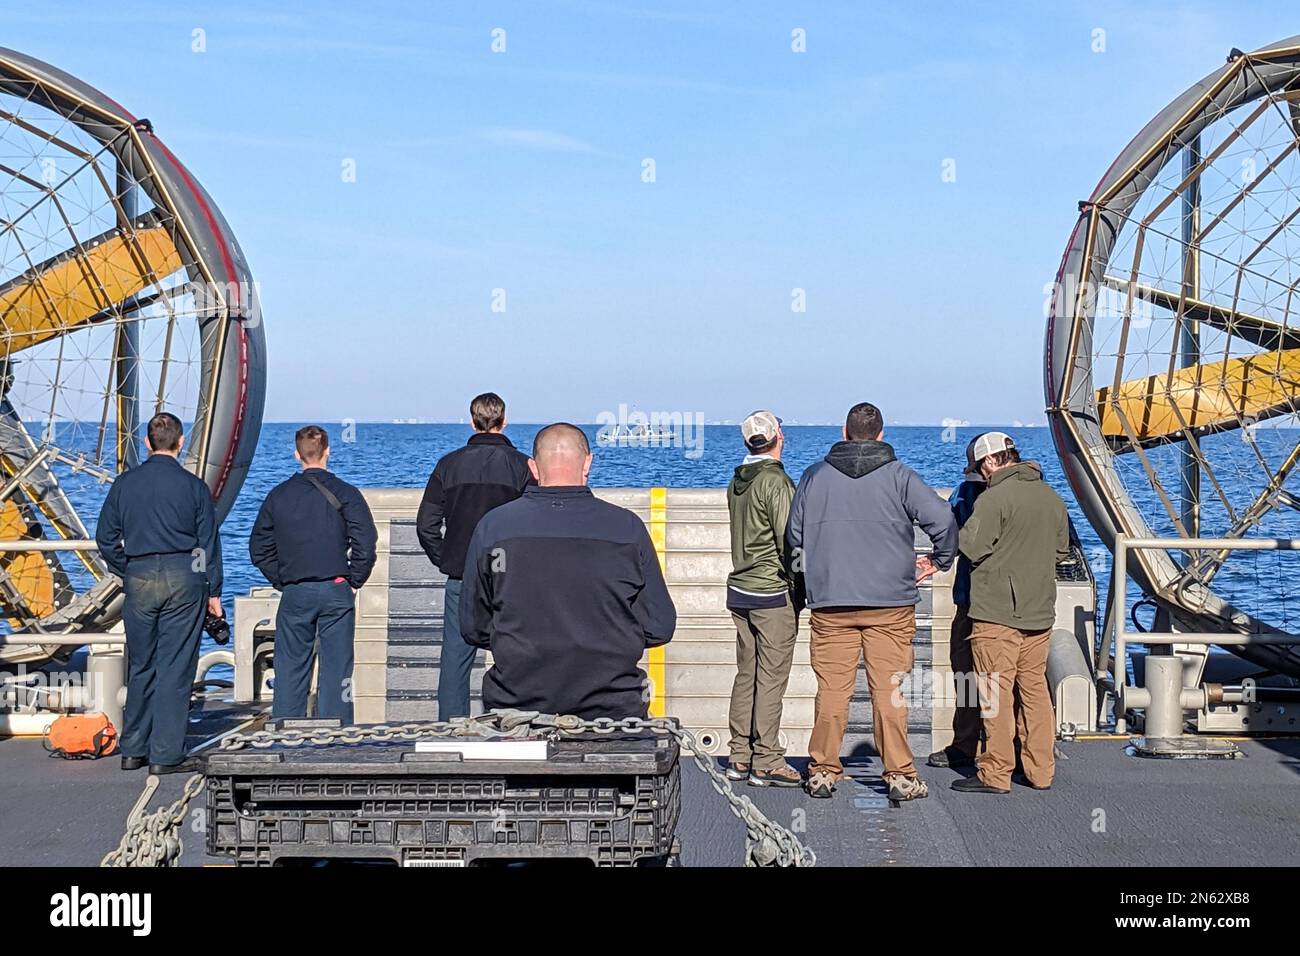 FBI technical and forensic experts from the FBI's Science and Technology Branch positioned for incoming evidence aboard an Assault Craft Unit (ACU) Four operate landing craft air cushions (LCAC) during recovery efforts of a high-altitude balloon in the Atlantic Ocean, on February 8, 2023. At the direction of the President of the United States and with the full support of the Government of Canada, a U.S. Air Force F-22 Raptor, on the authority of Northern Command, engaged and brought down the Chinese spy balloon within sovereign U.S. airspace and over U.S. territorial waters on February 4, 2023 Stock Photo